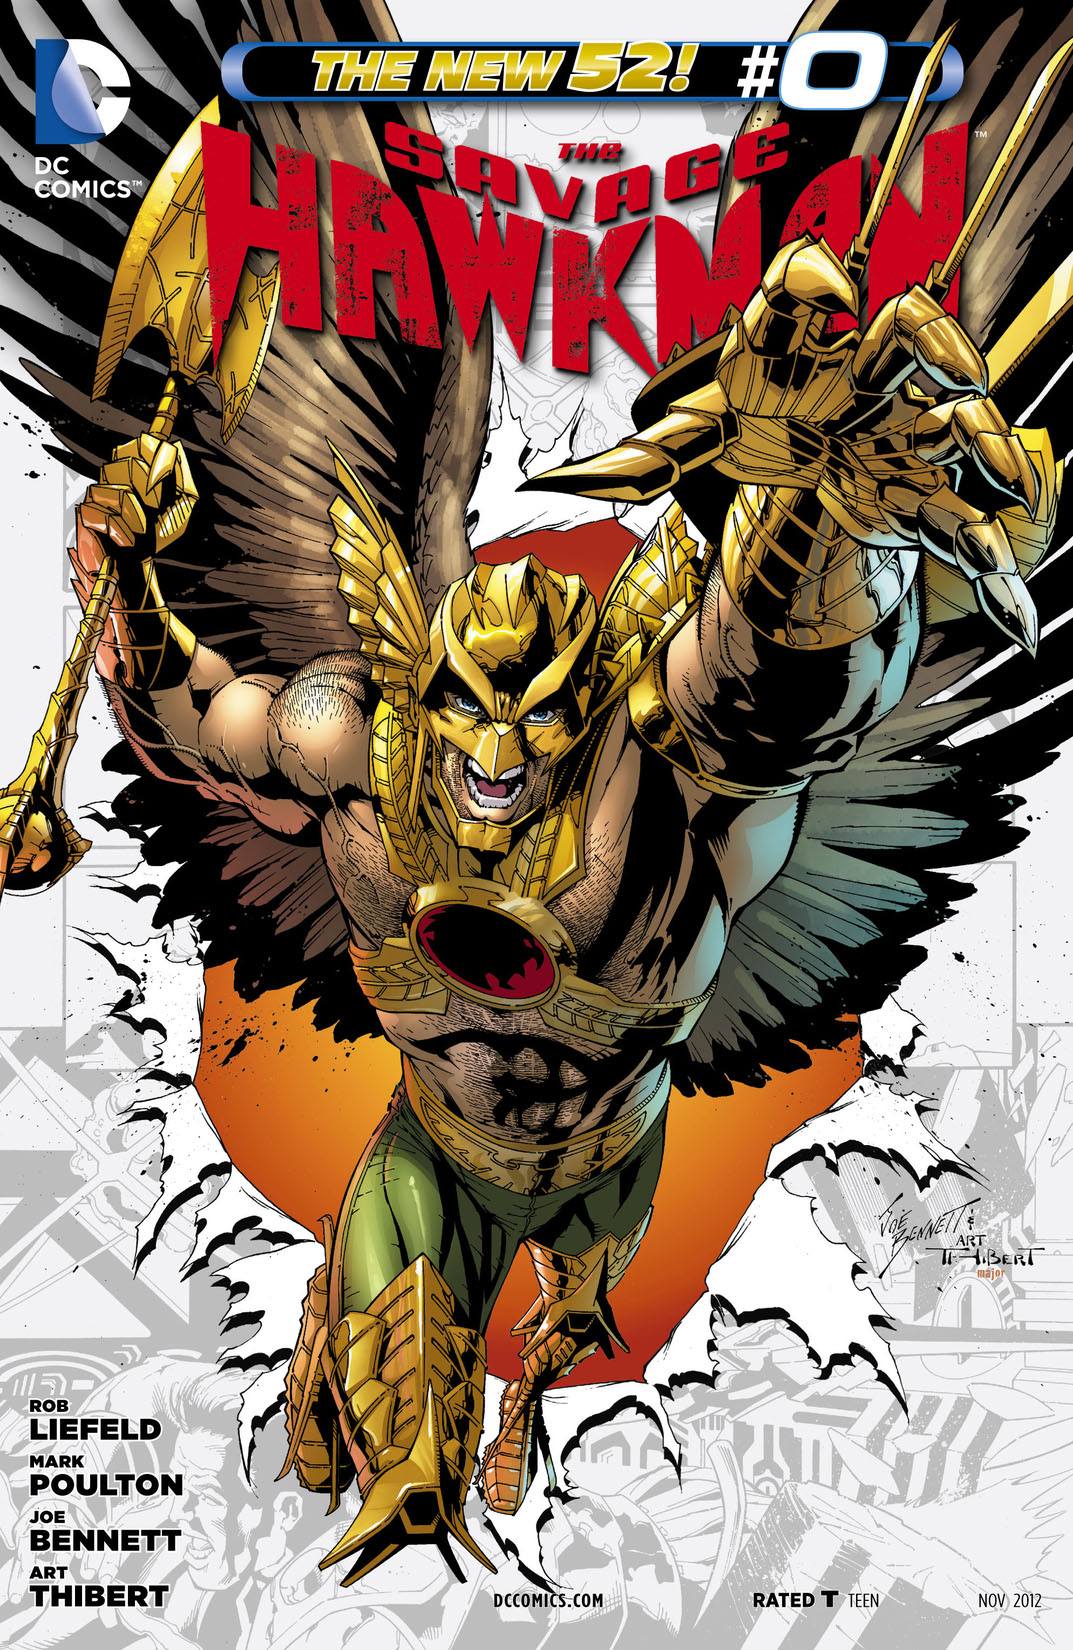 The Savage Hawkman #0 preview images